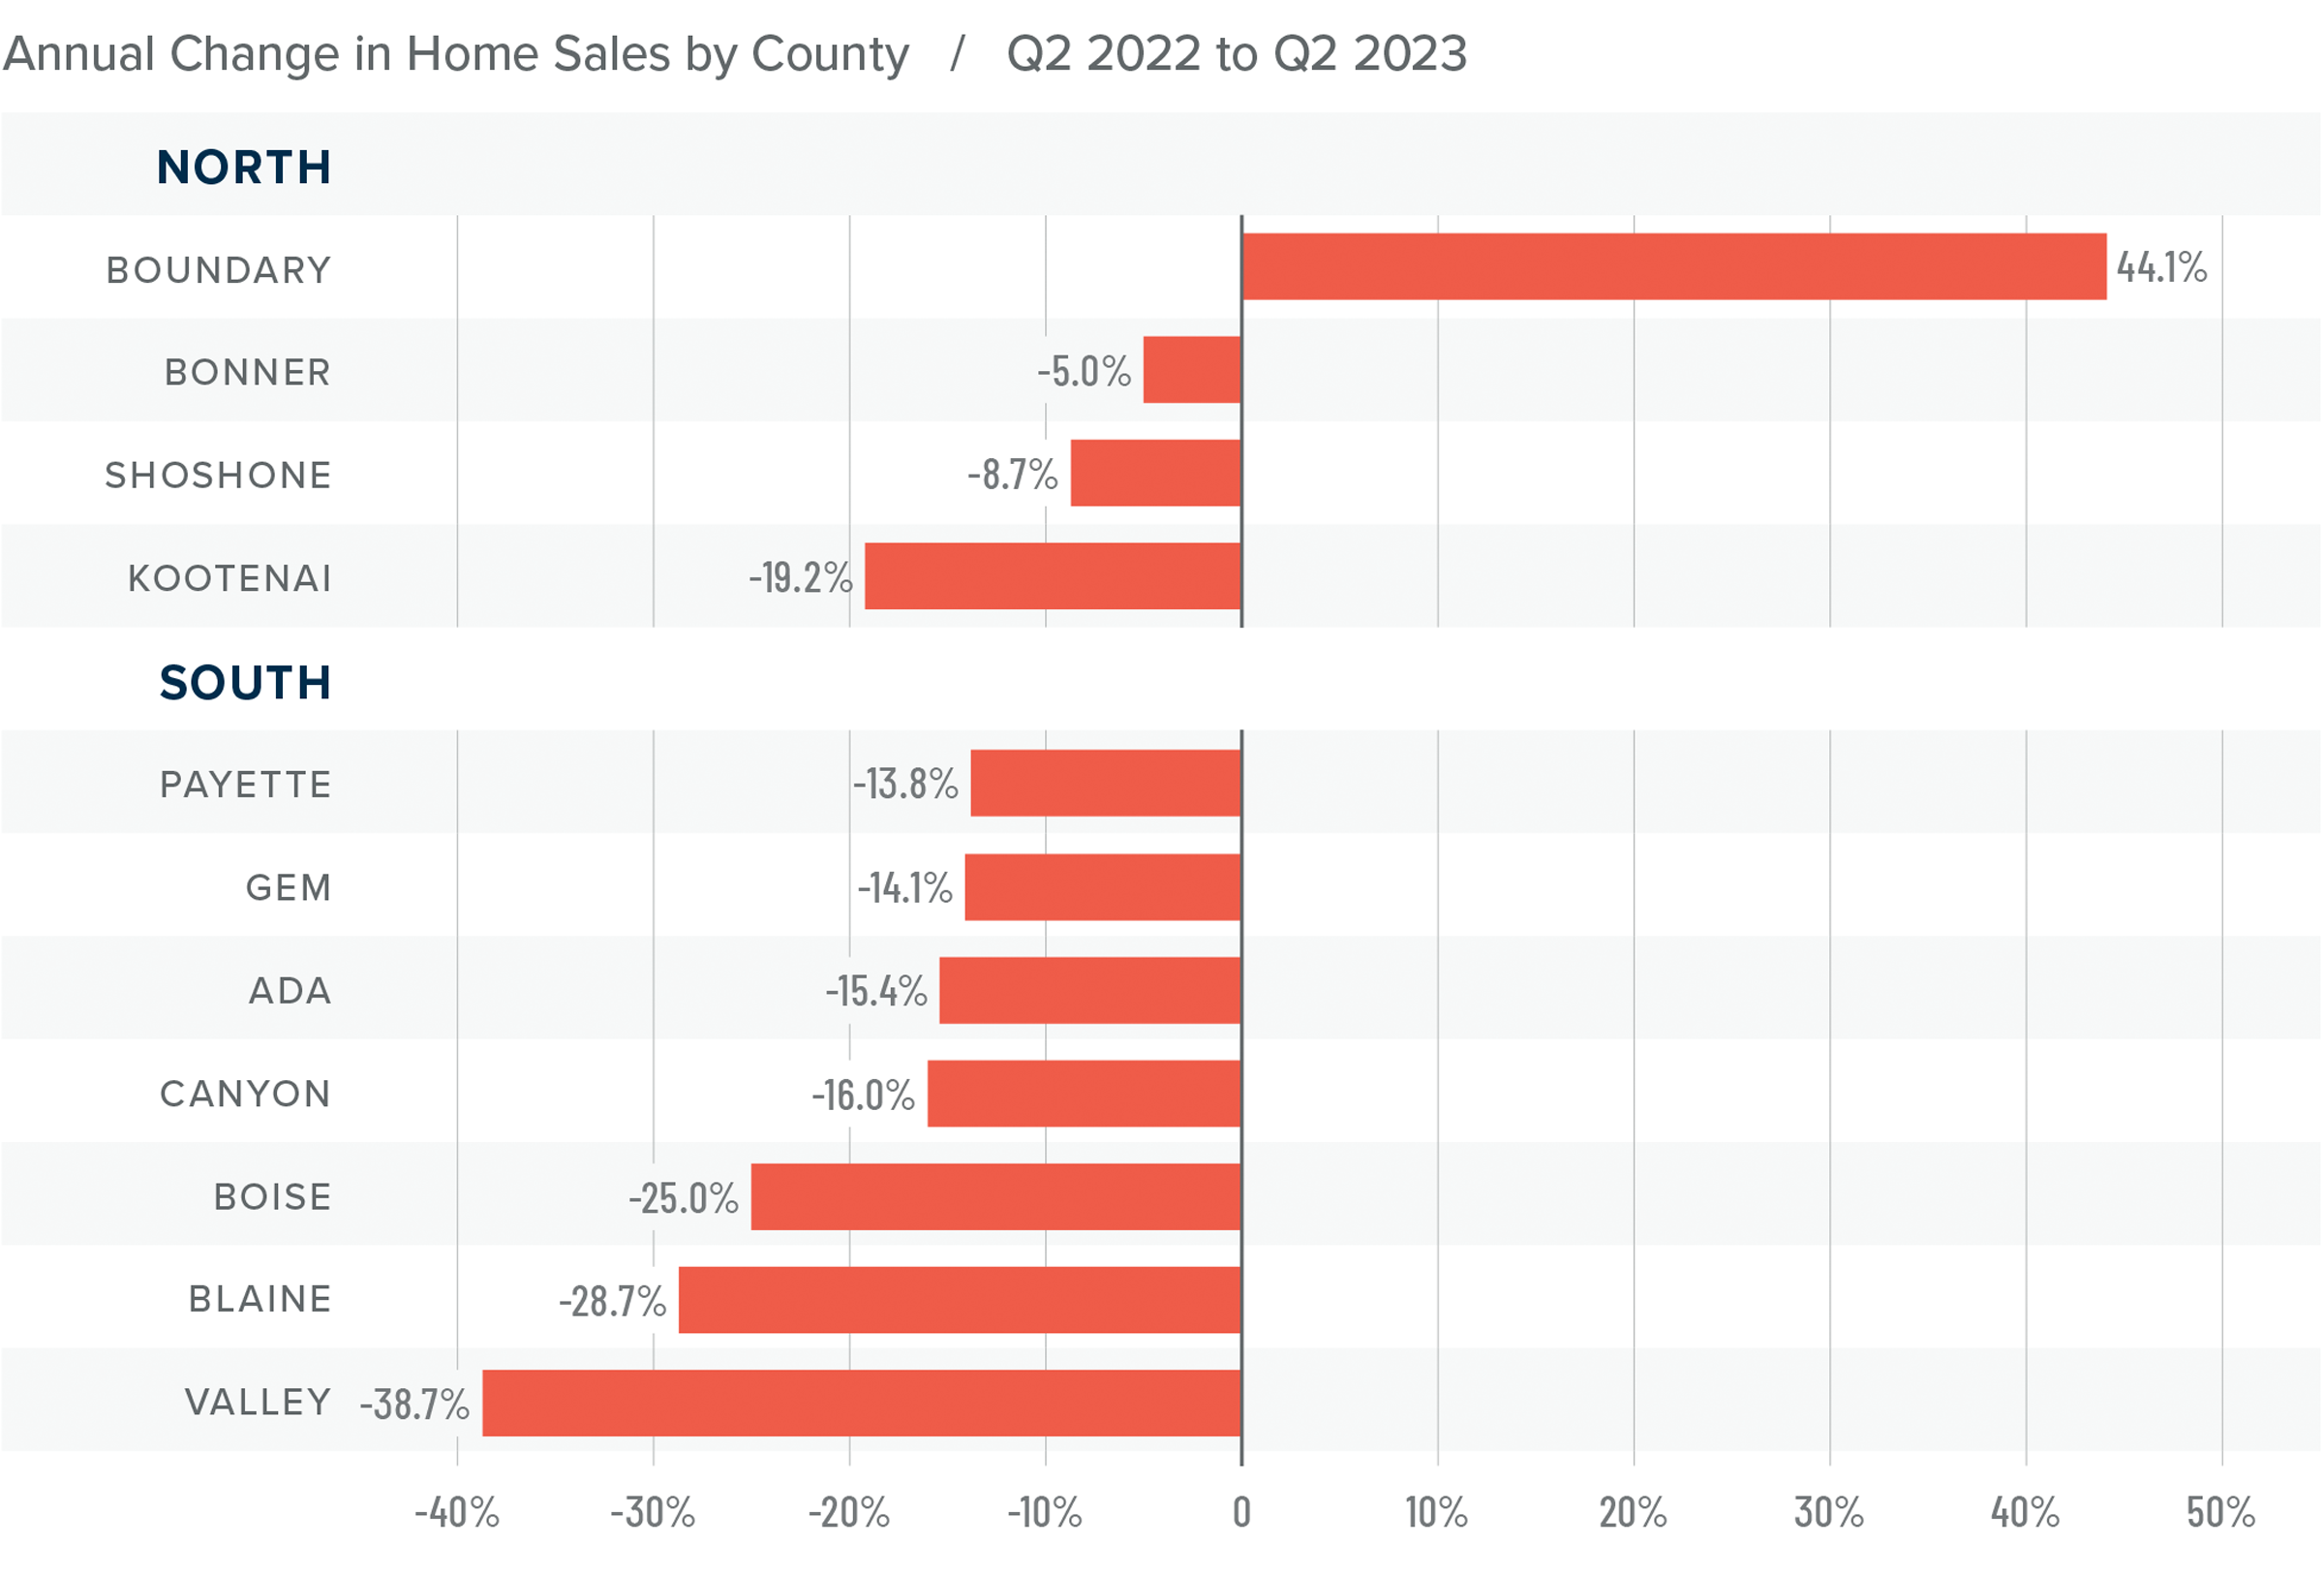 A graph showing the annual change in home sales by county for North and South Idaho from Q2 2022 to Q2 2023. Boundary County had the greatest positive change at 44.1%, while Valley had the largest negative change at -38.7%. Counties like Kootenai and Canyon were in the middle at around -18%.